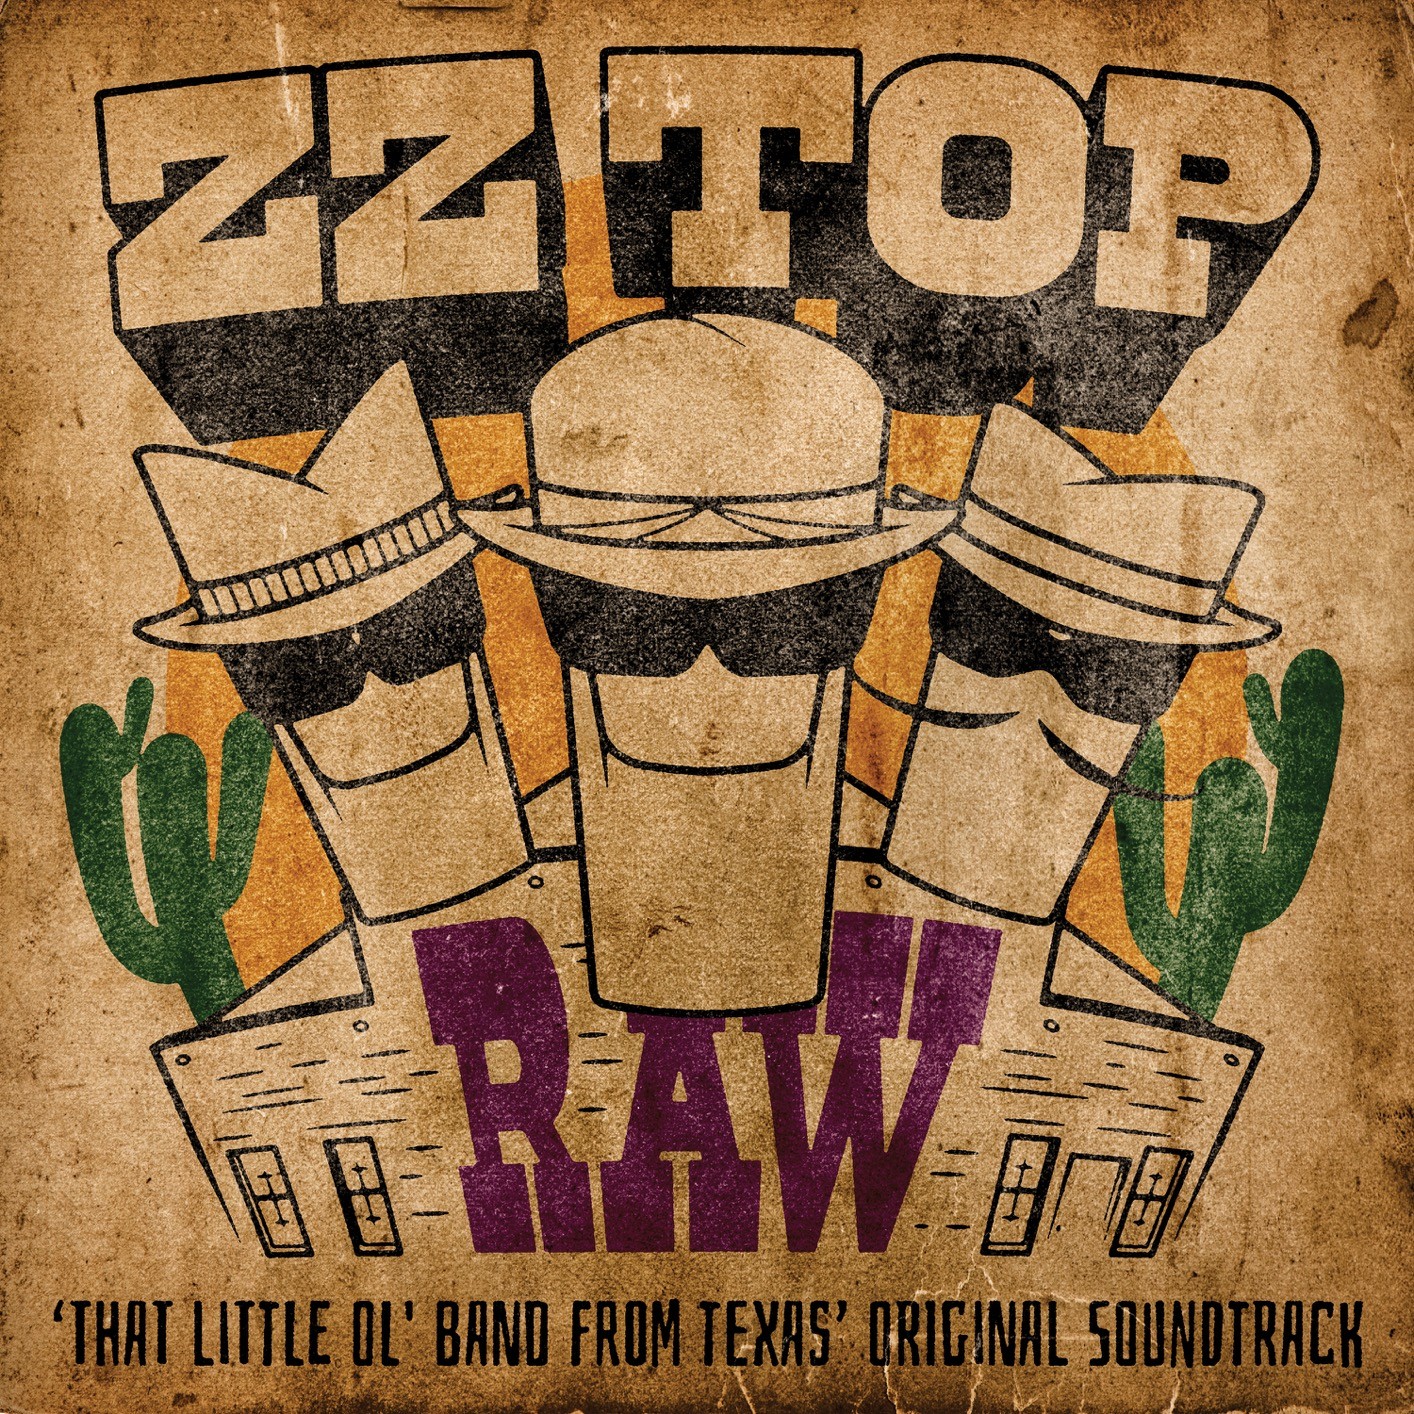 ZZ Top - RAW – ‘That Little Ol’ Band From Texas’ Original Soundtrack